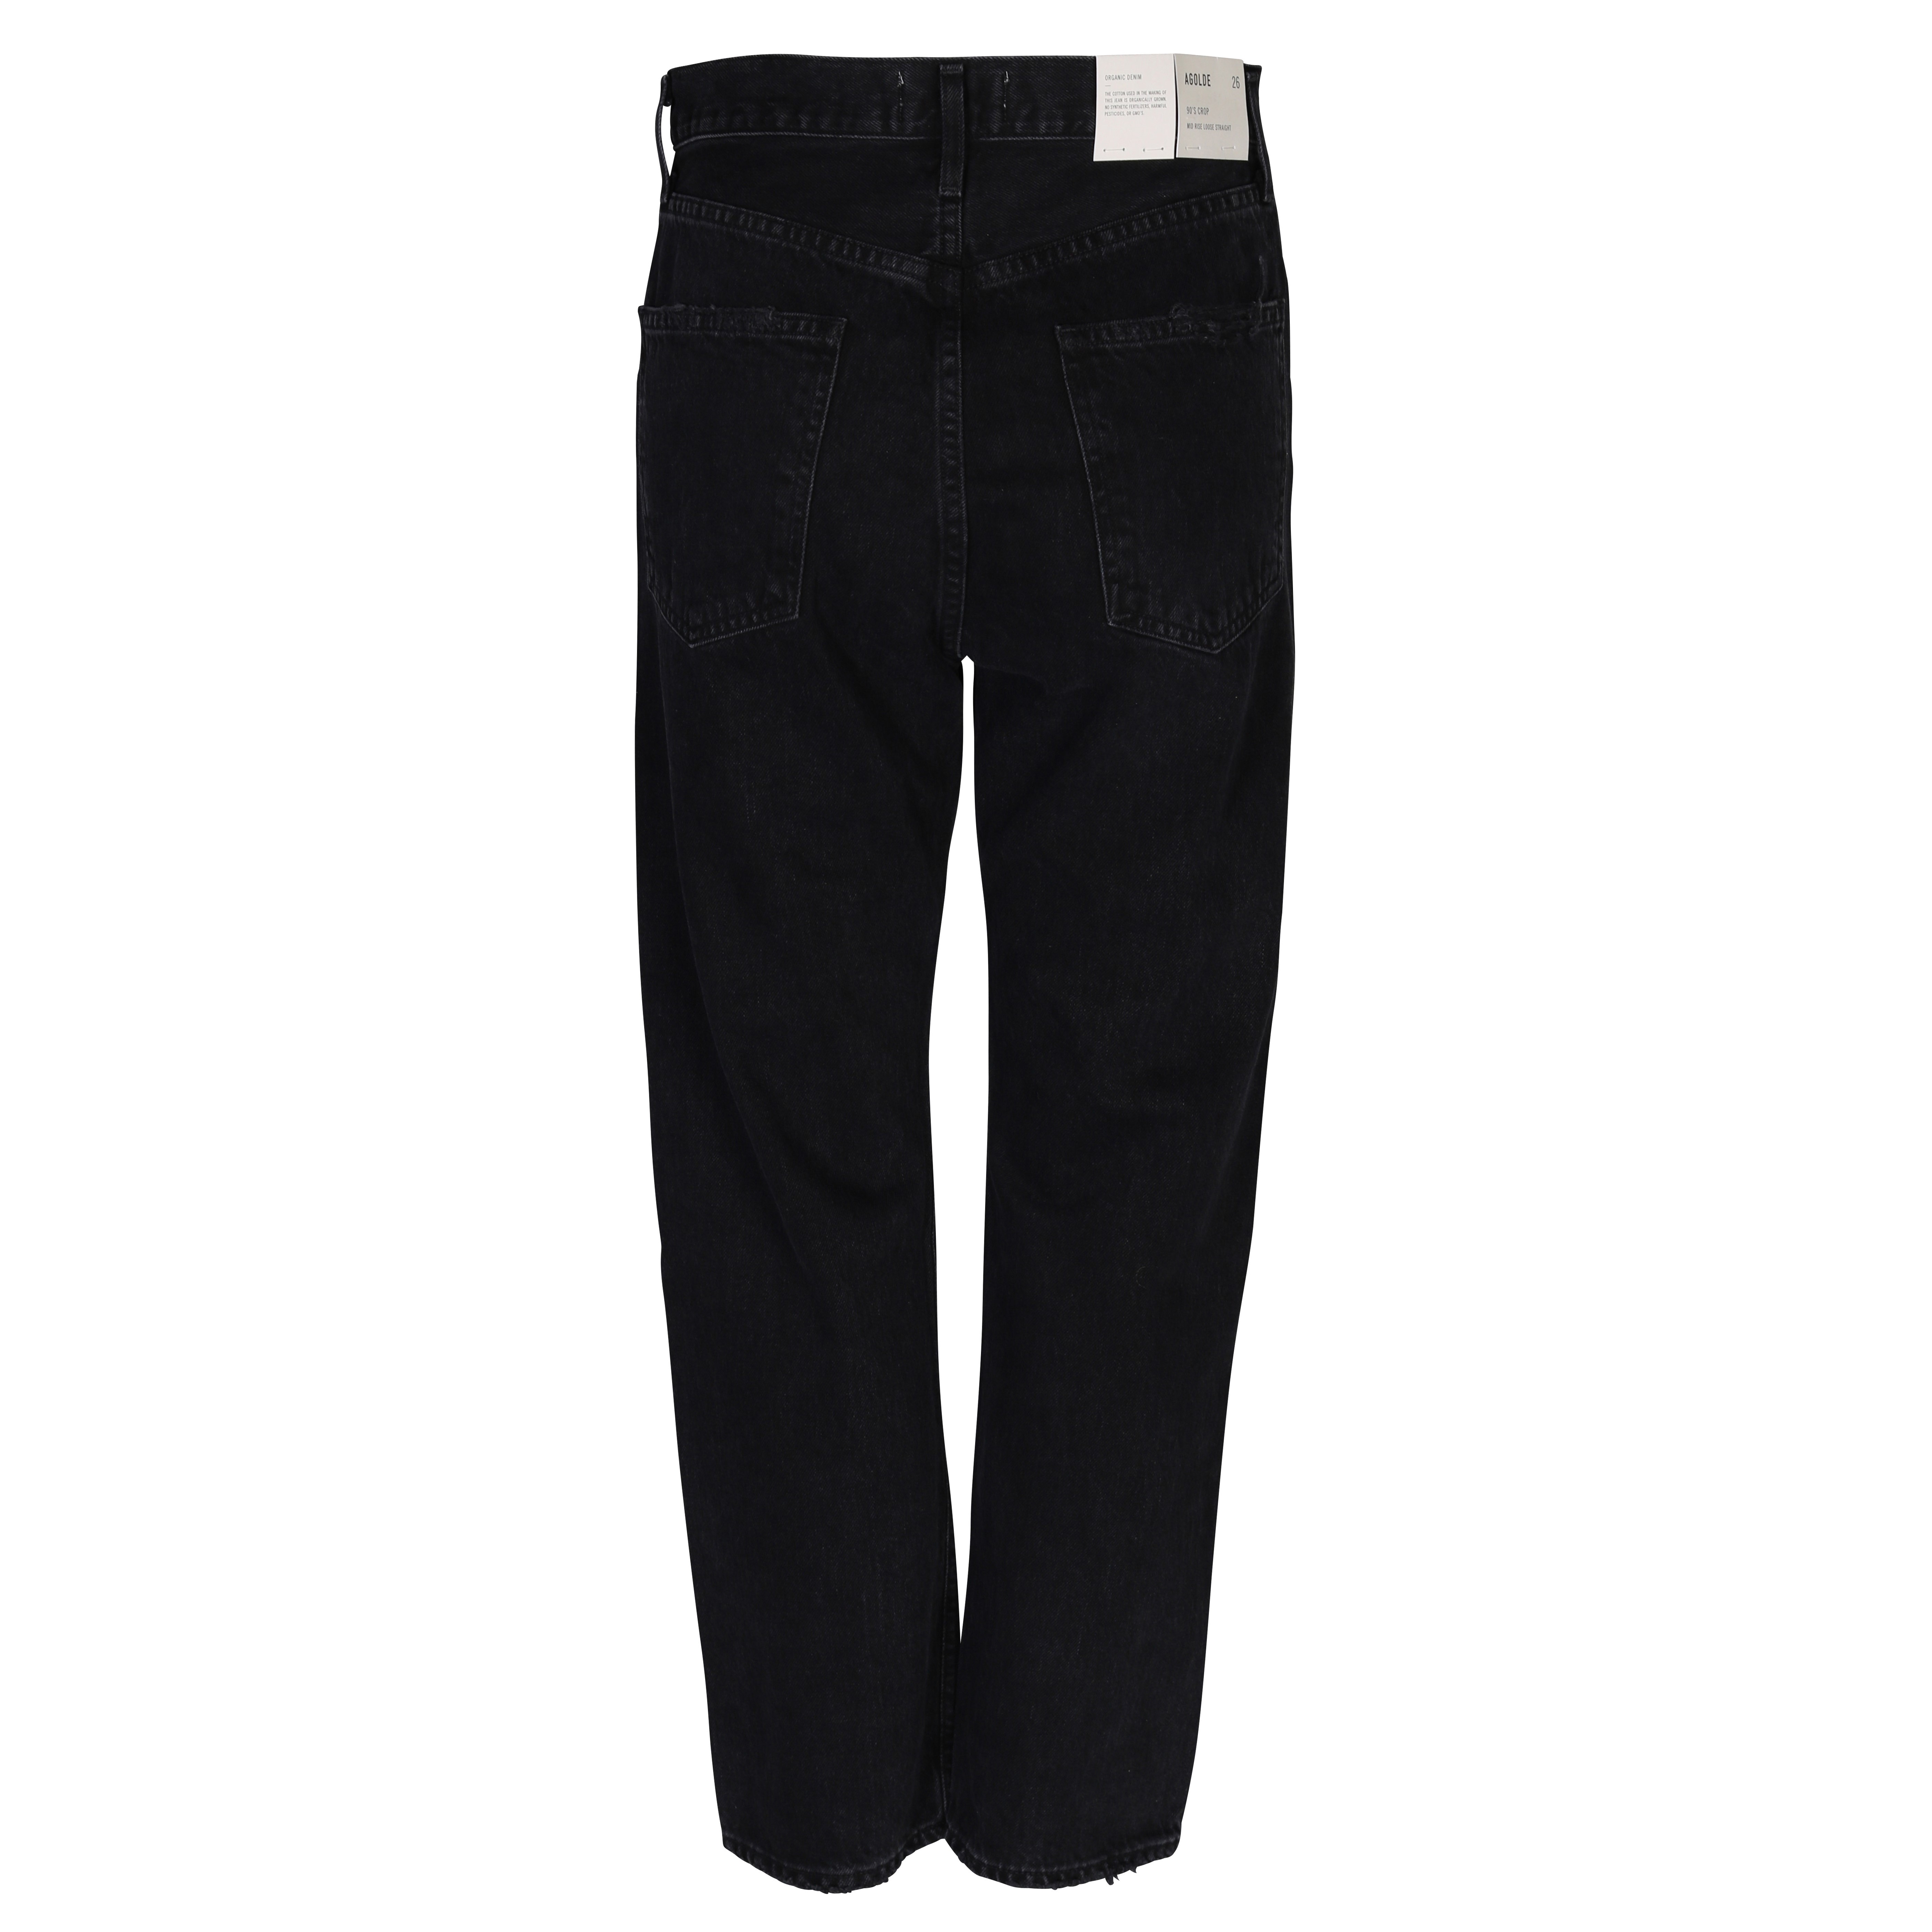 Agolde Jeans 90s Cropped in Black/Bauhaus Washed W 24